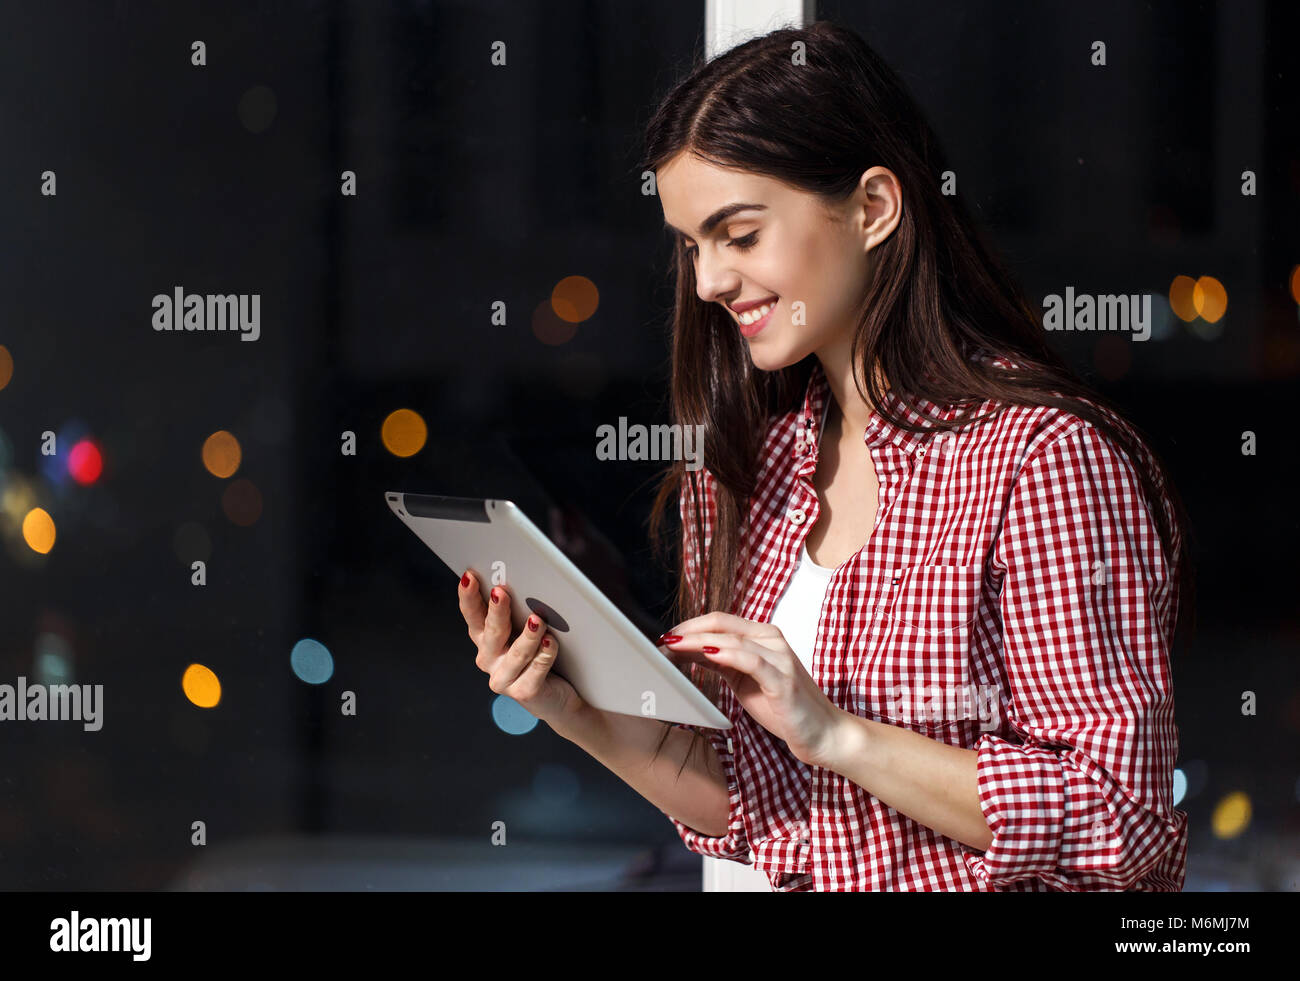 Girl with Tablet on Windowsill Stock Photo